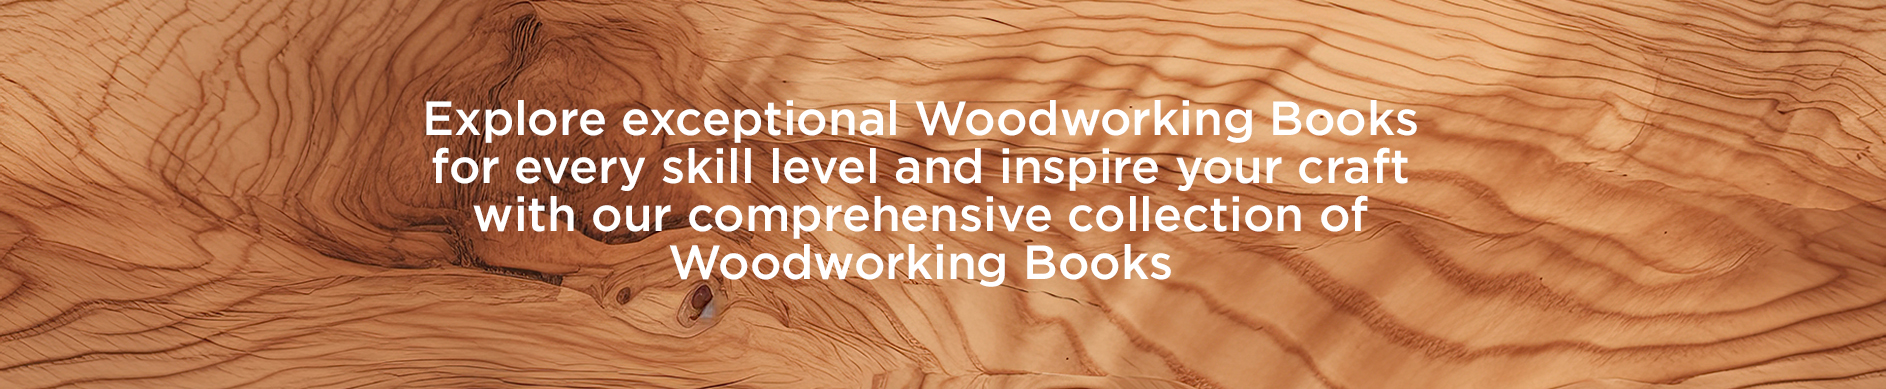 WOODWORKING_banner_2